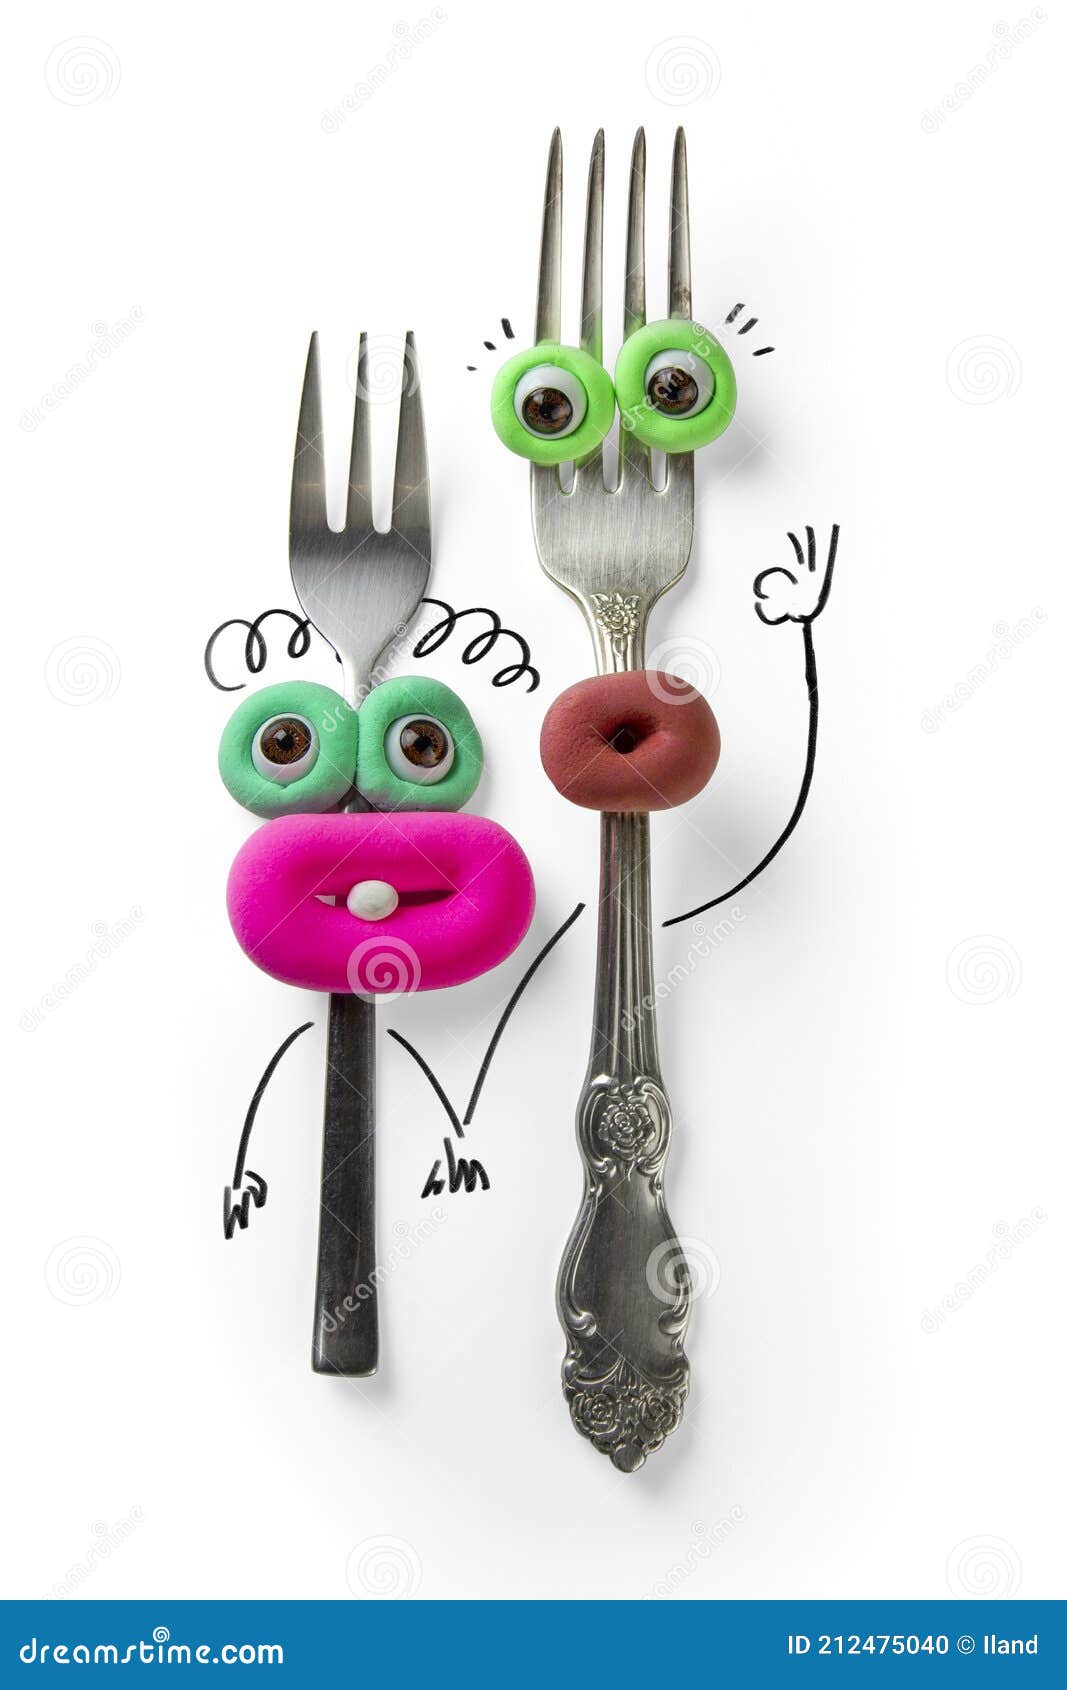 Animated Fork with Eyes and Mouth. Stock Photo - Image of kitchen, silver:  212475040